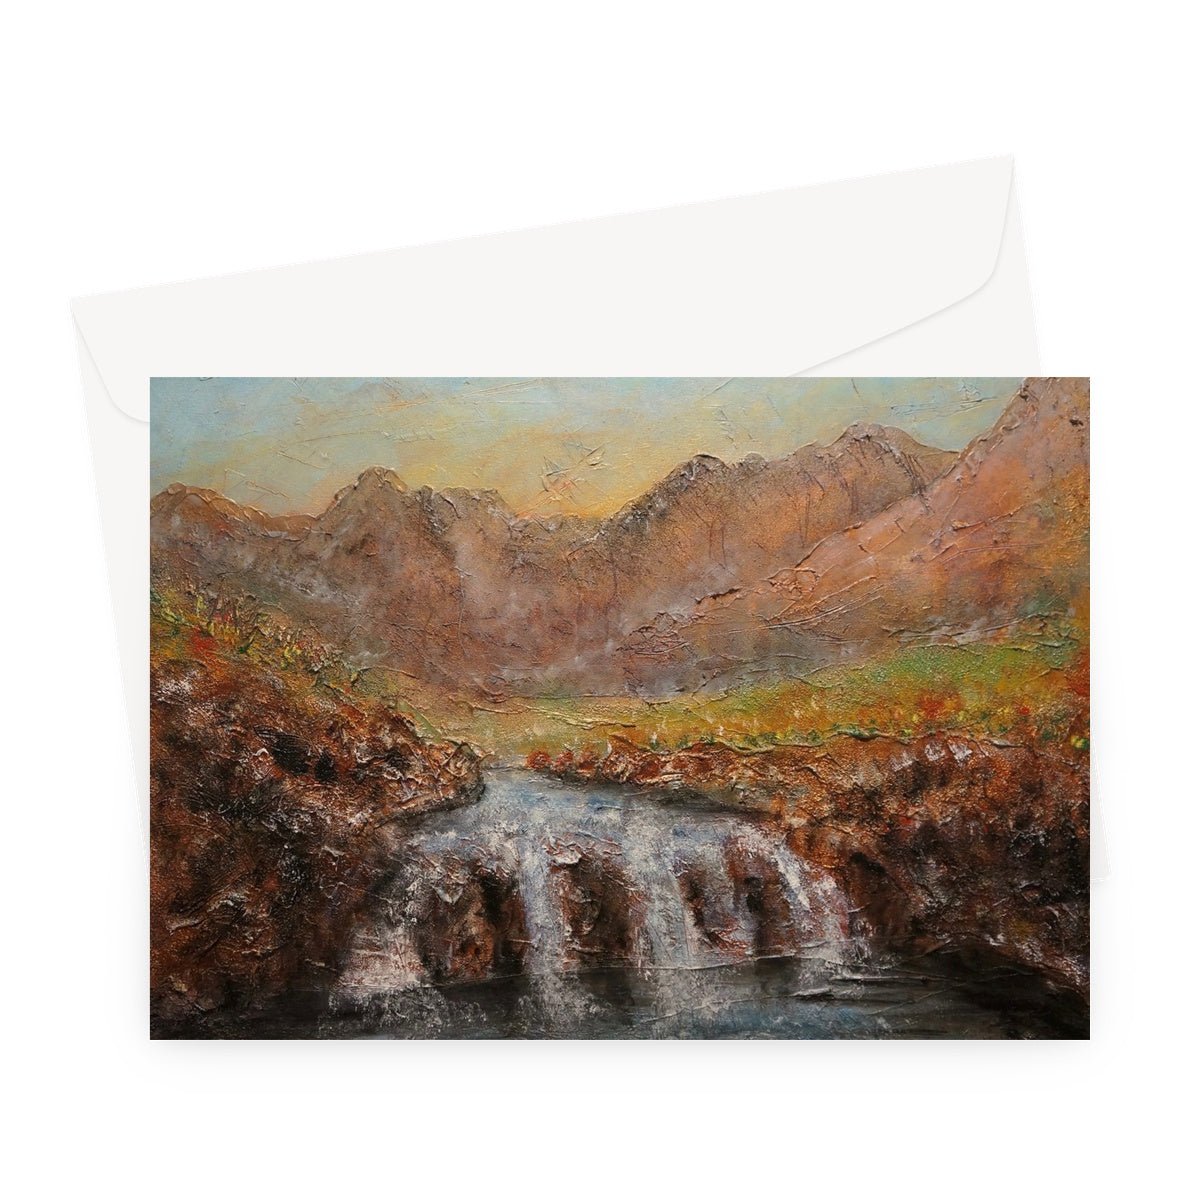 Fairy Pools Dawn Skye Art Gifts Greeting Card-Greetings Cards-Skye Art Gallery-A5 Landscape-10 Cards-Paintings, Prints, Homeware, Art Gifts From Scotland By Scottish Artist Kevin Hunter